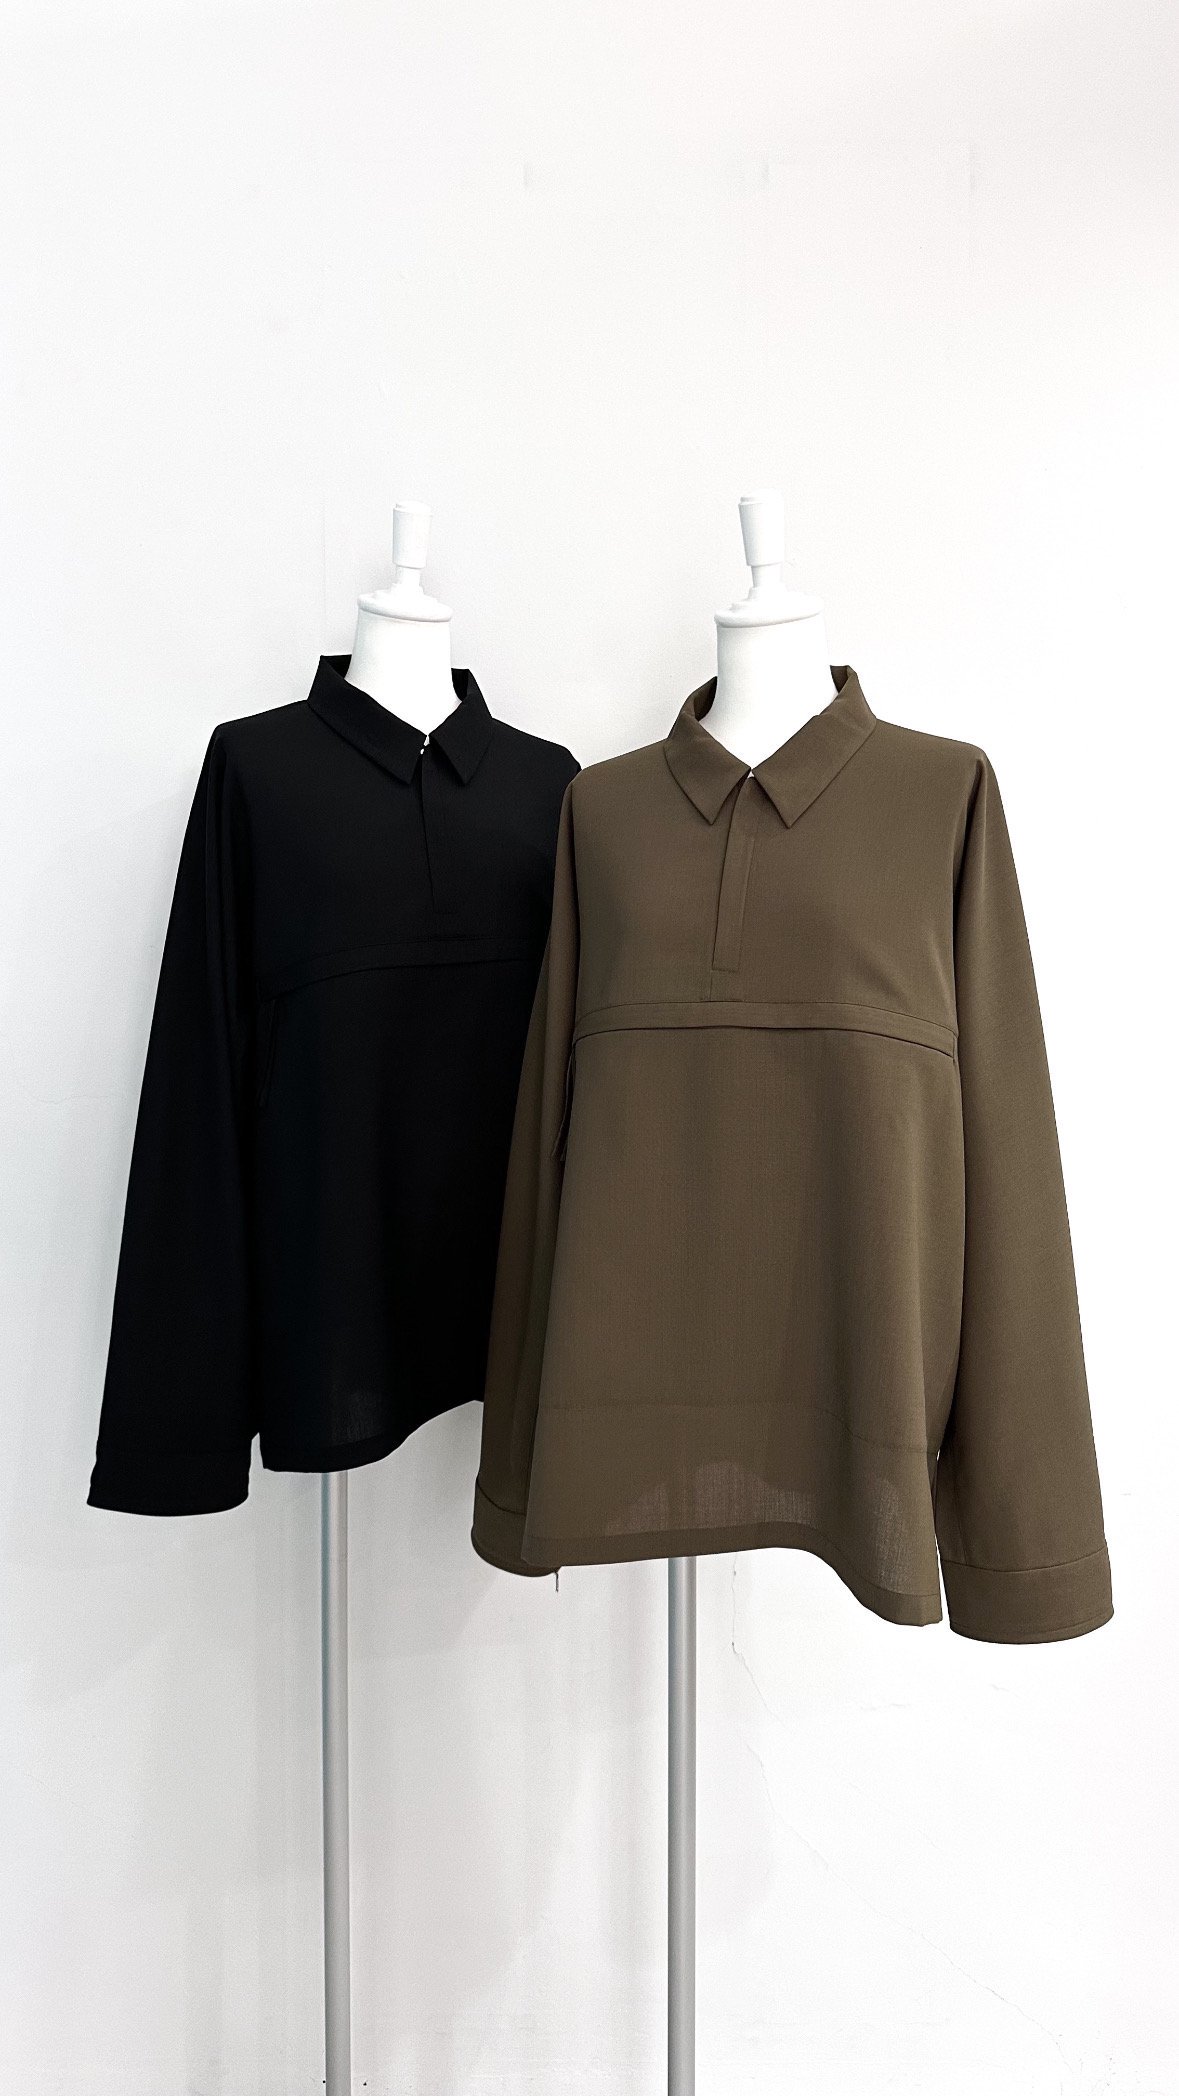 <img class='new_mark_img1' src='https://img.shop-pro.jp/img/new/icons47.gif' style='border:none;display:inline;margin:0px;padding:0px;width:auto;' />shoulder bag shirt